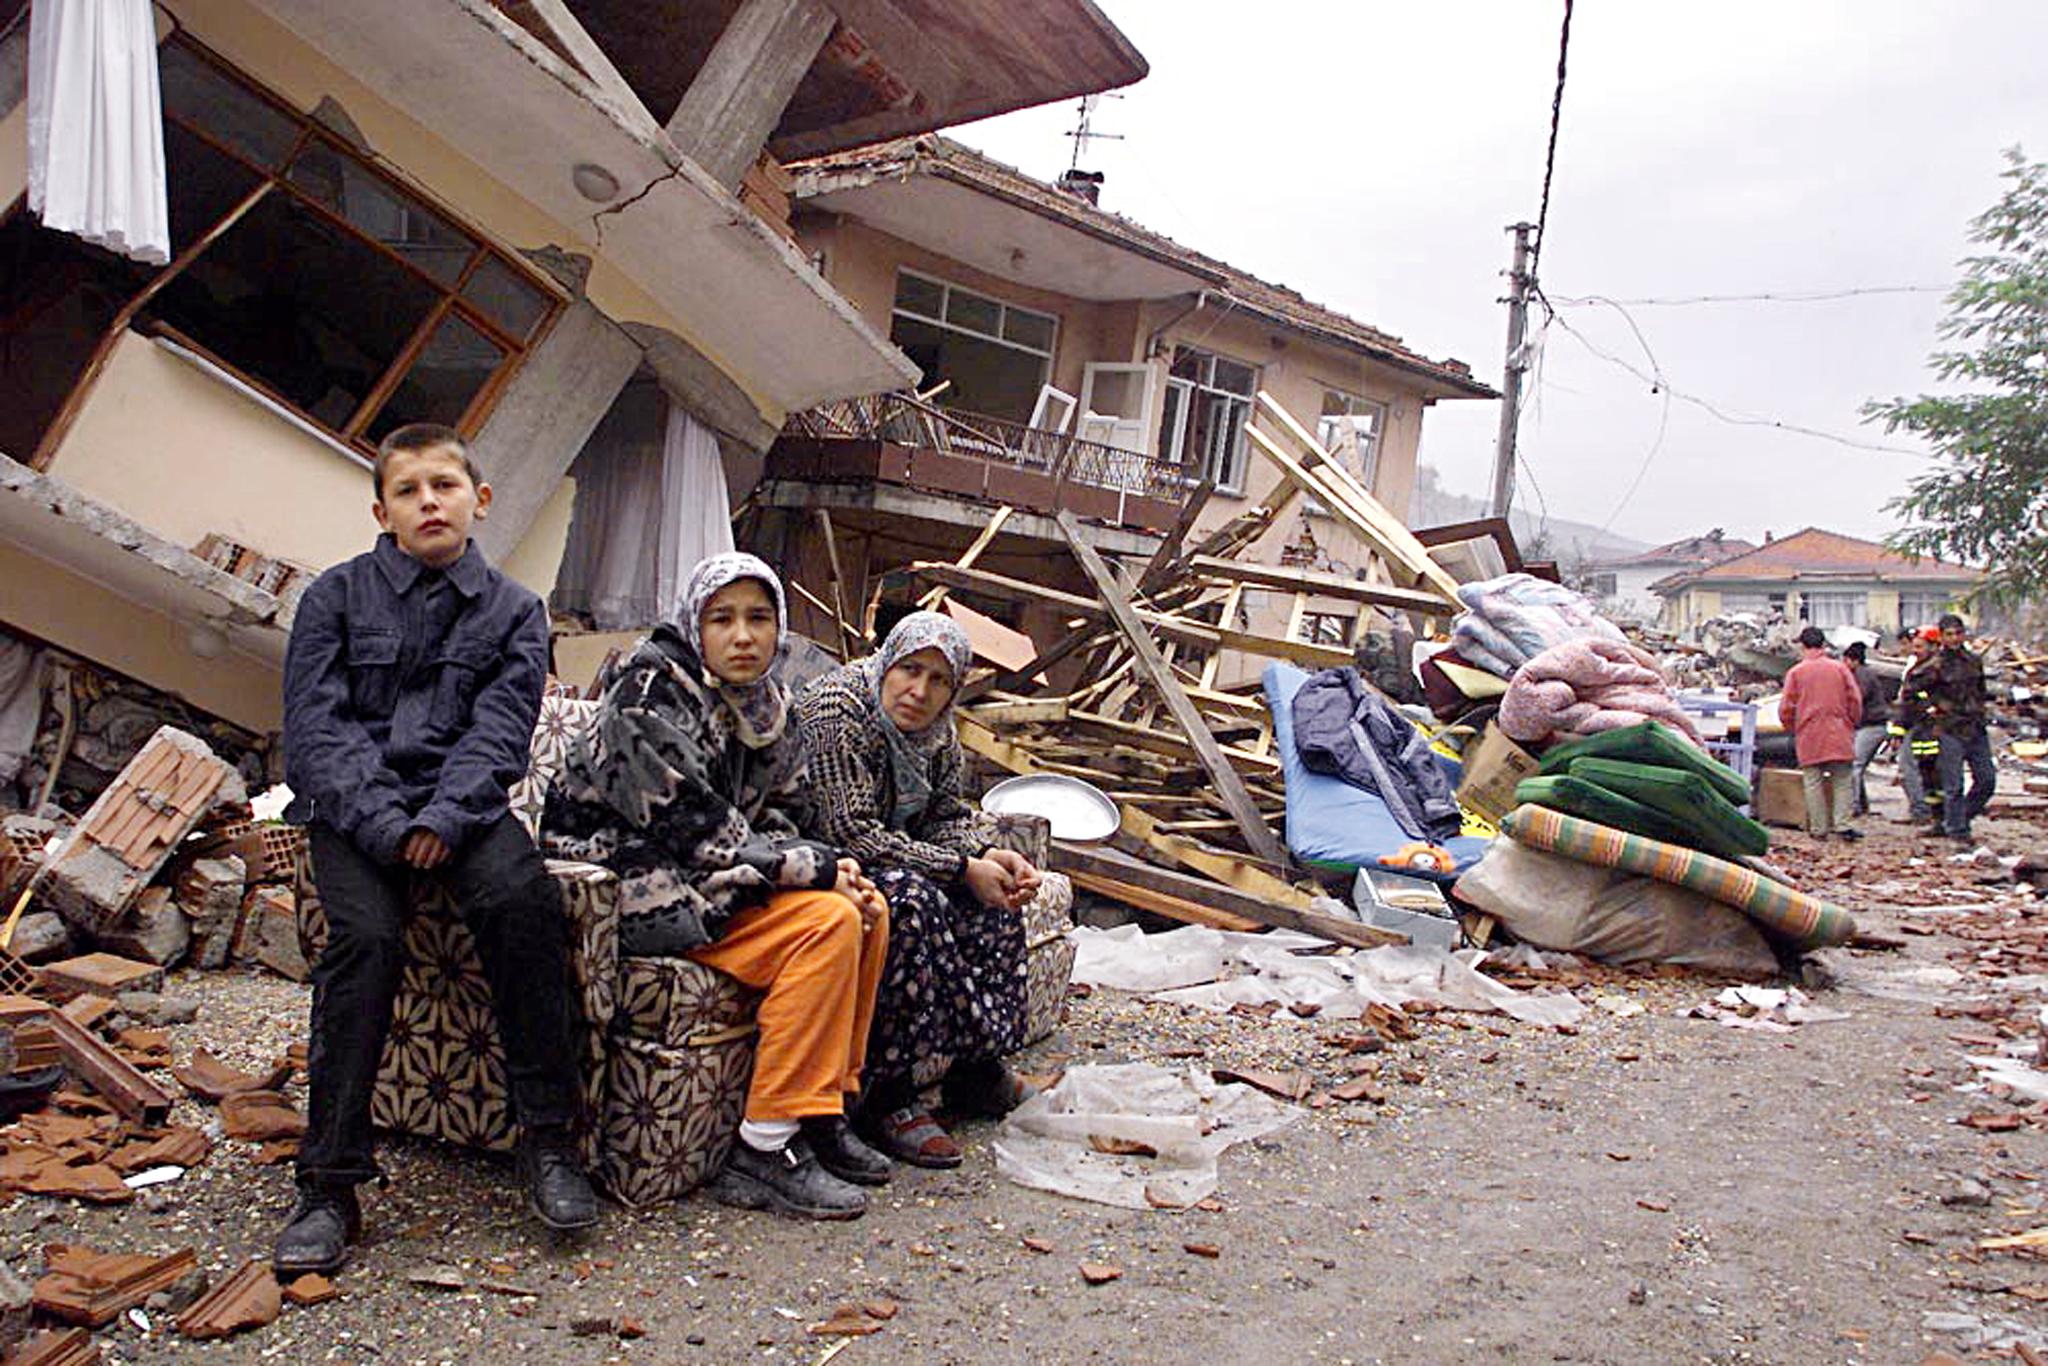 A Kaynasli family sit on what is left of their possessions after the earthquakes